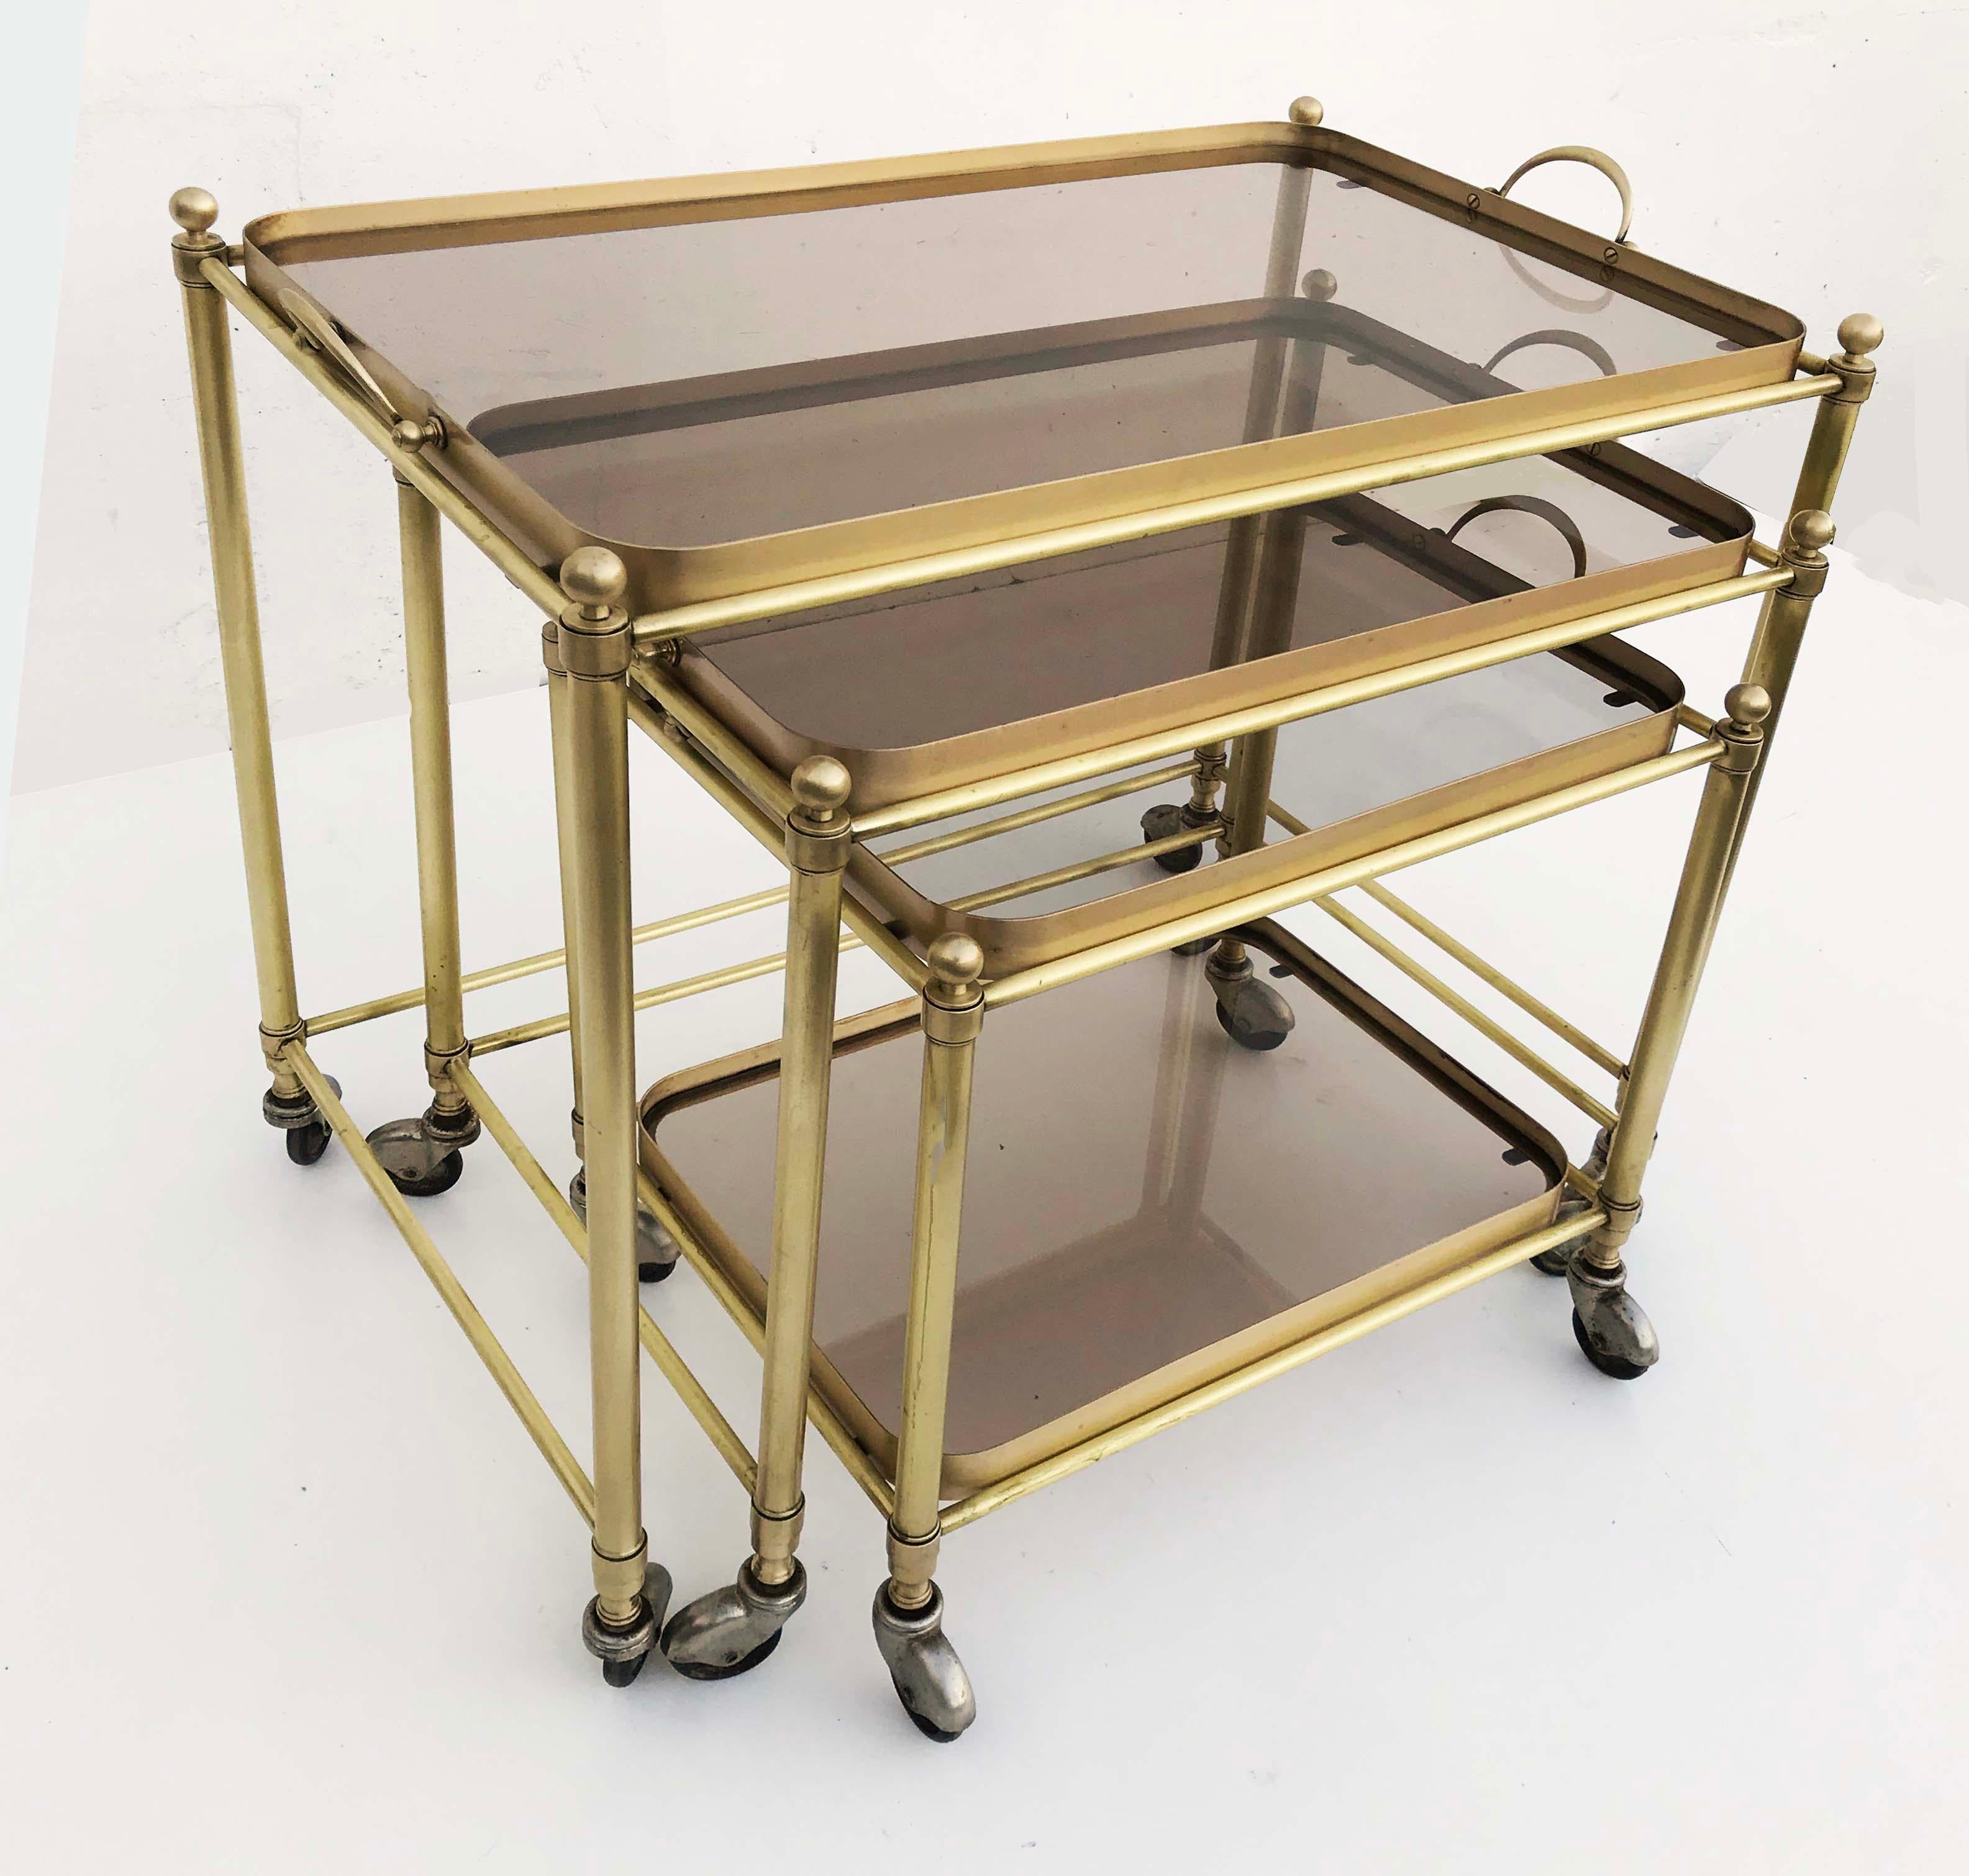 Superb set of Nesting table by Maison Lancel, each one with a removable tray.
 $ 2980 for the of tables
Bronze and smoke glass, all Table on wheels.
The smallest has two-tier.
Totally restored and refinished
Dimensions:
25 L /15 1/2 D / 24 H
21 L